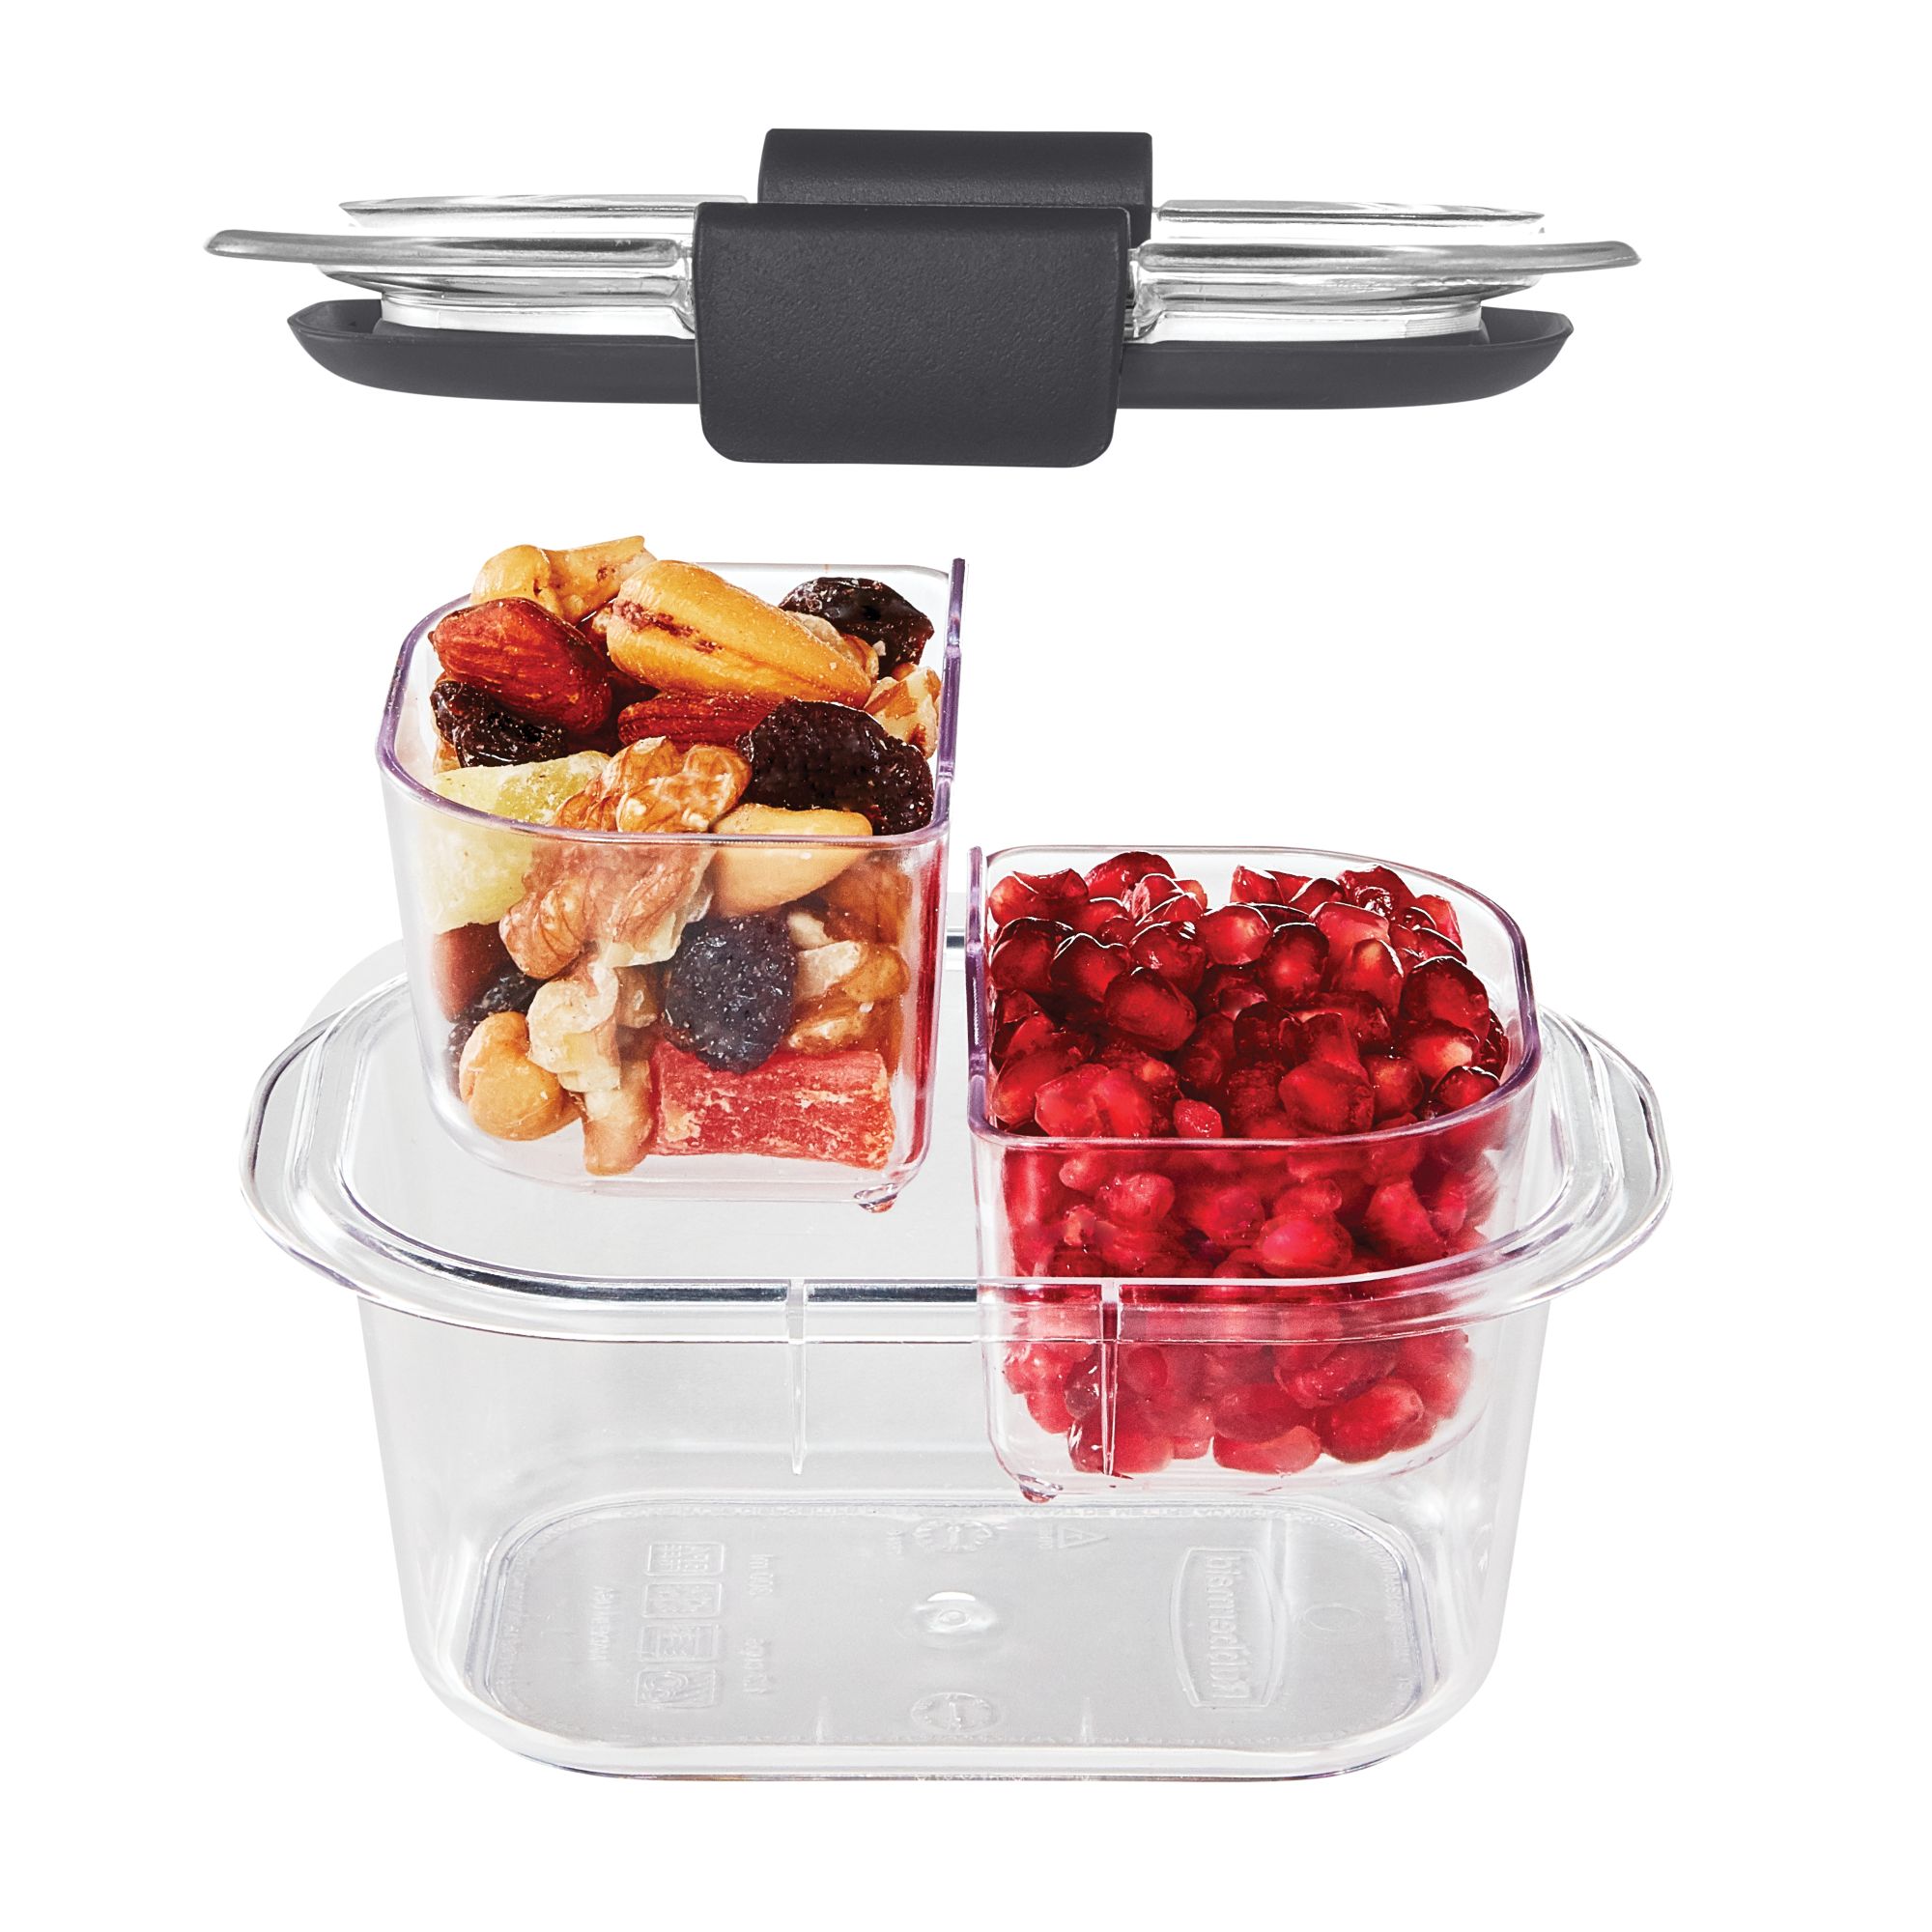 Rubbermaid, Brilliance, Food Storage Container, Salad and Snack Lunch Combo Kit, Clear, 9 Piece Set